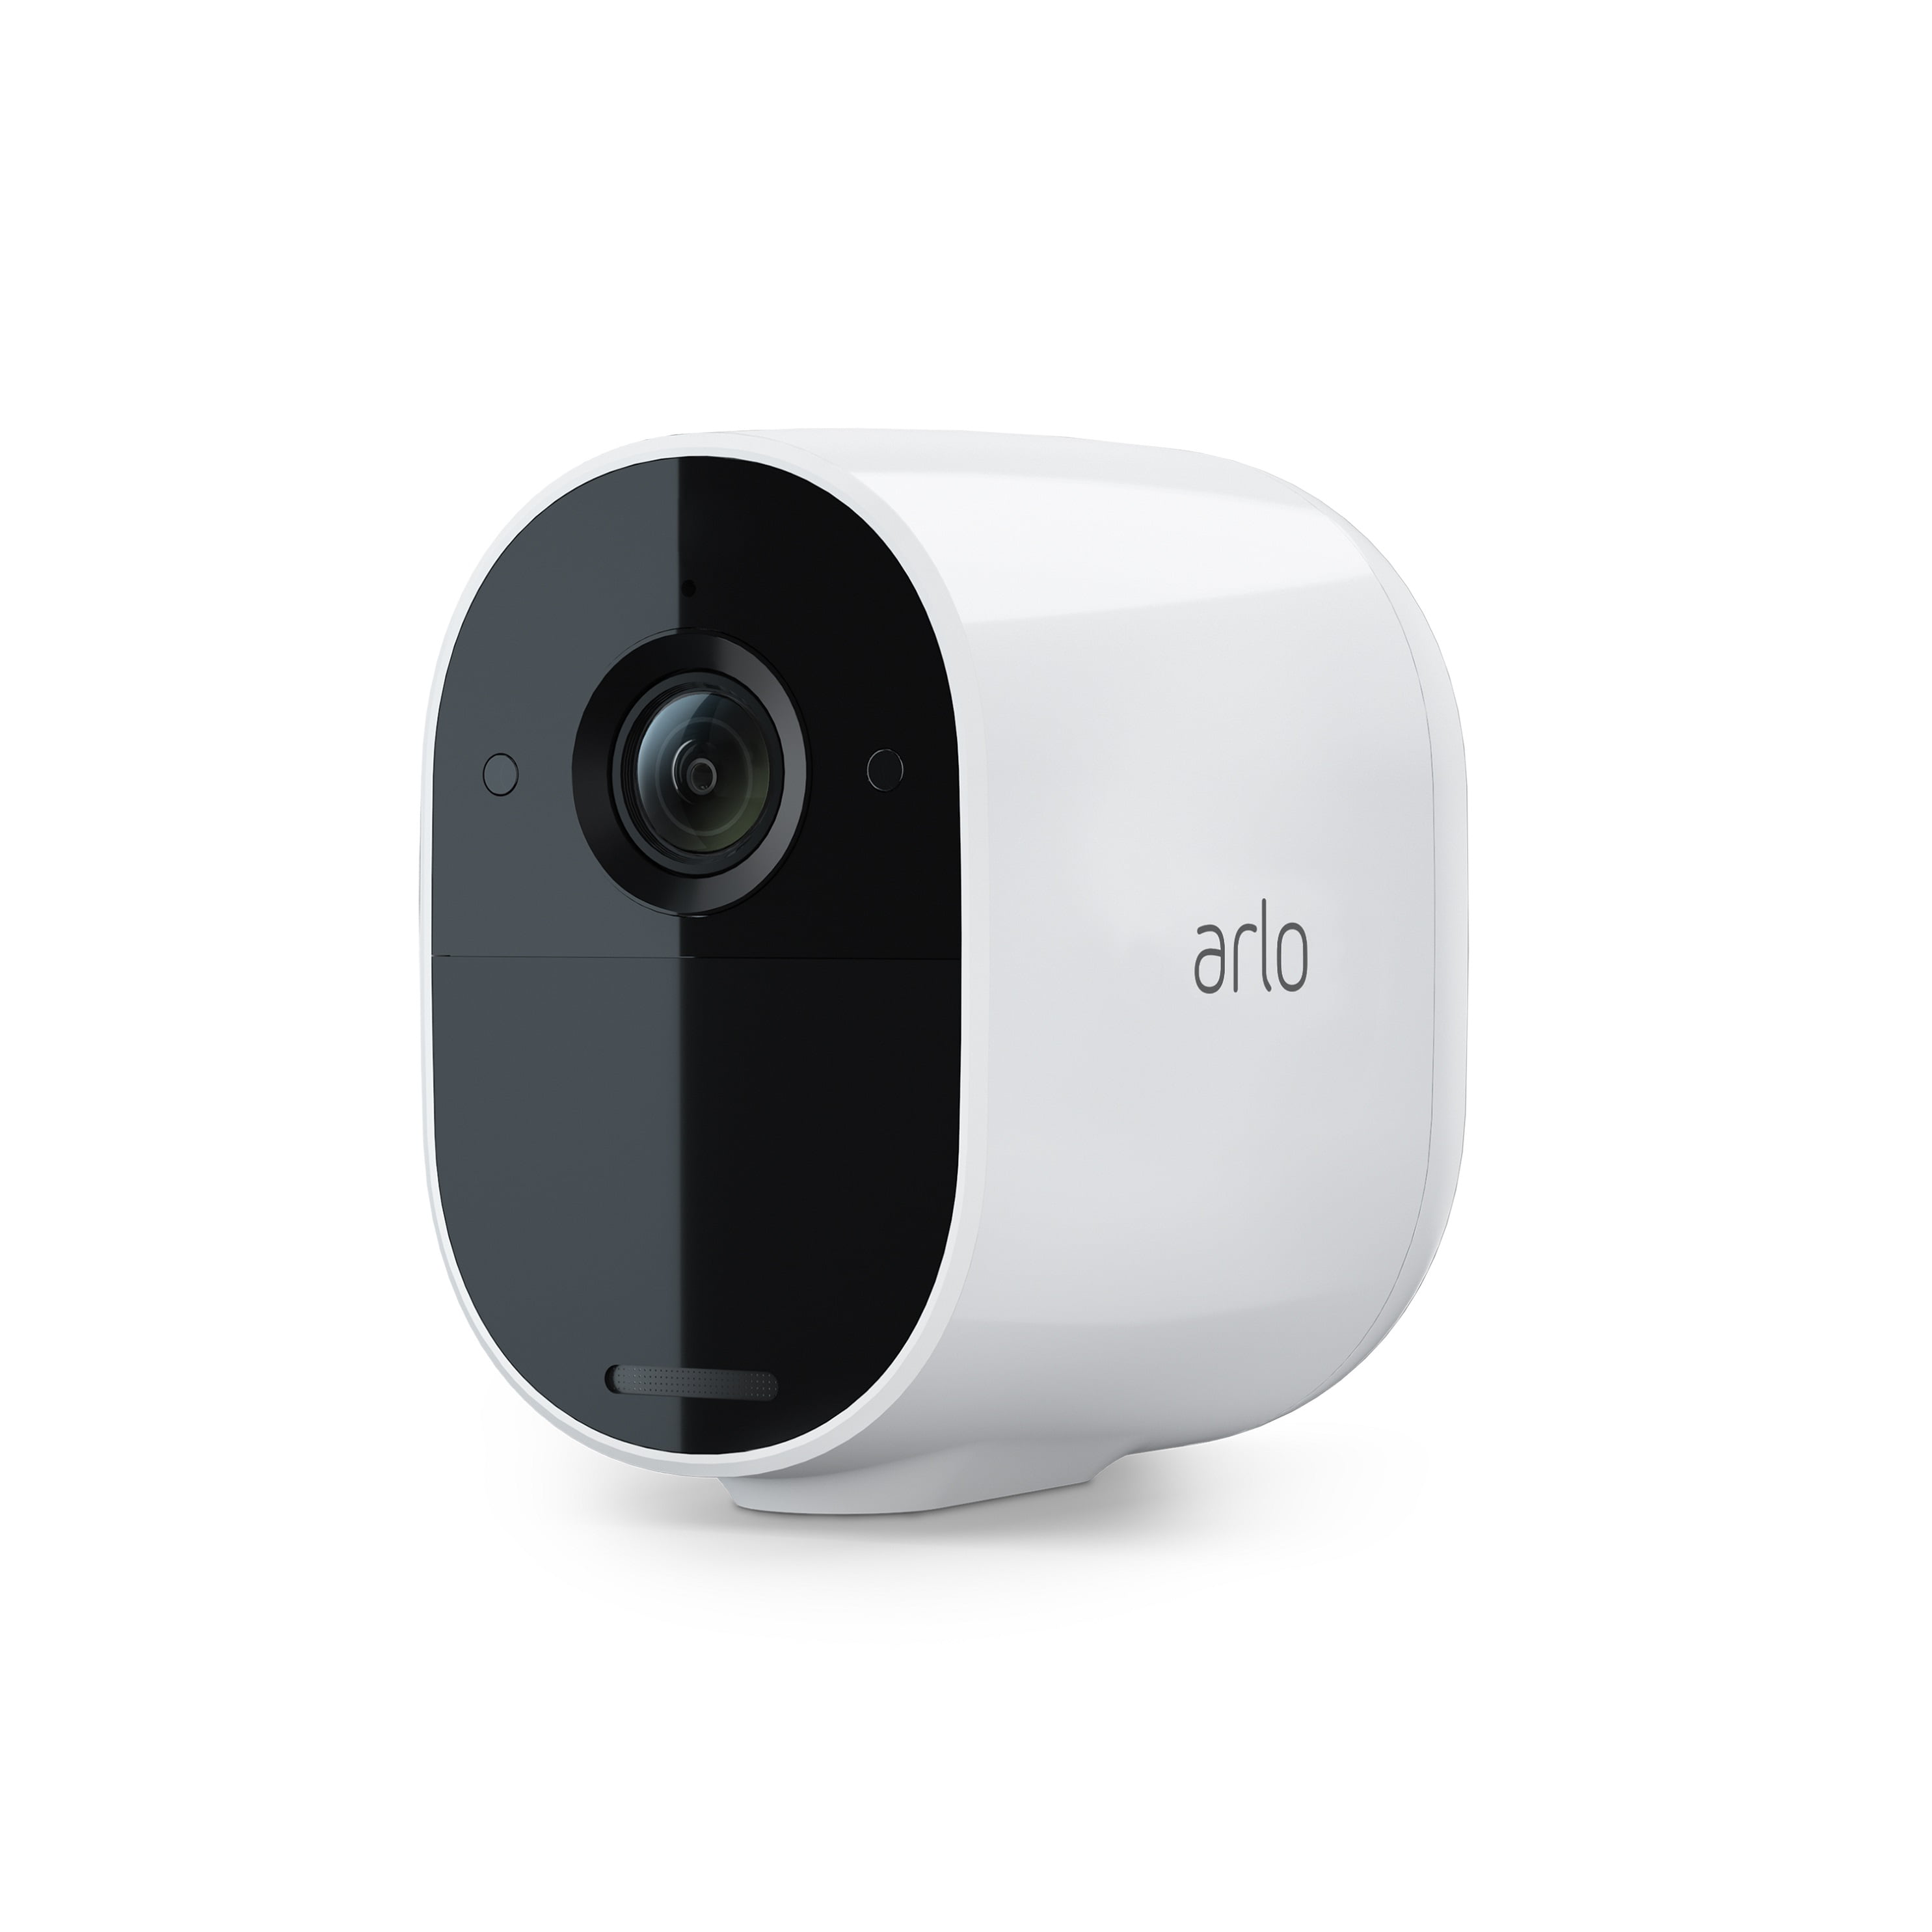 New & Sealed Arlo Pro 1-Camera Indoor/Outdoor Wireless 720p Security System 